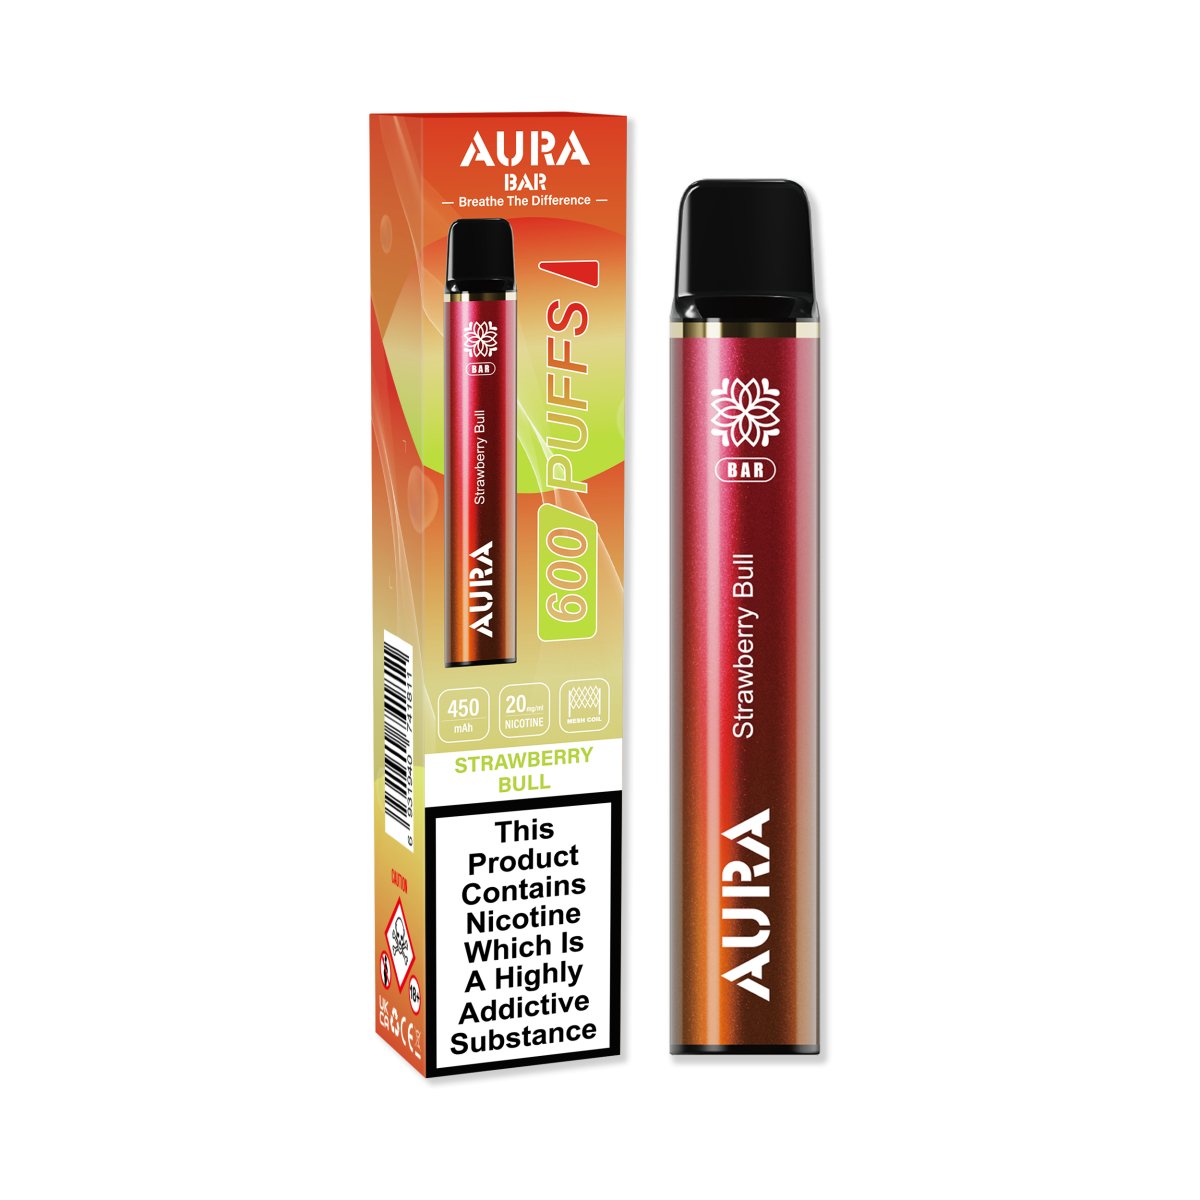 Crystal Prime - Aura Bar 600 Puffs Disposbale Vape By Crystal Prime - Box of 10 - theno1plugshop